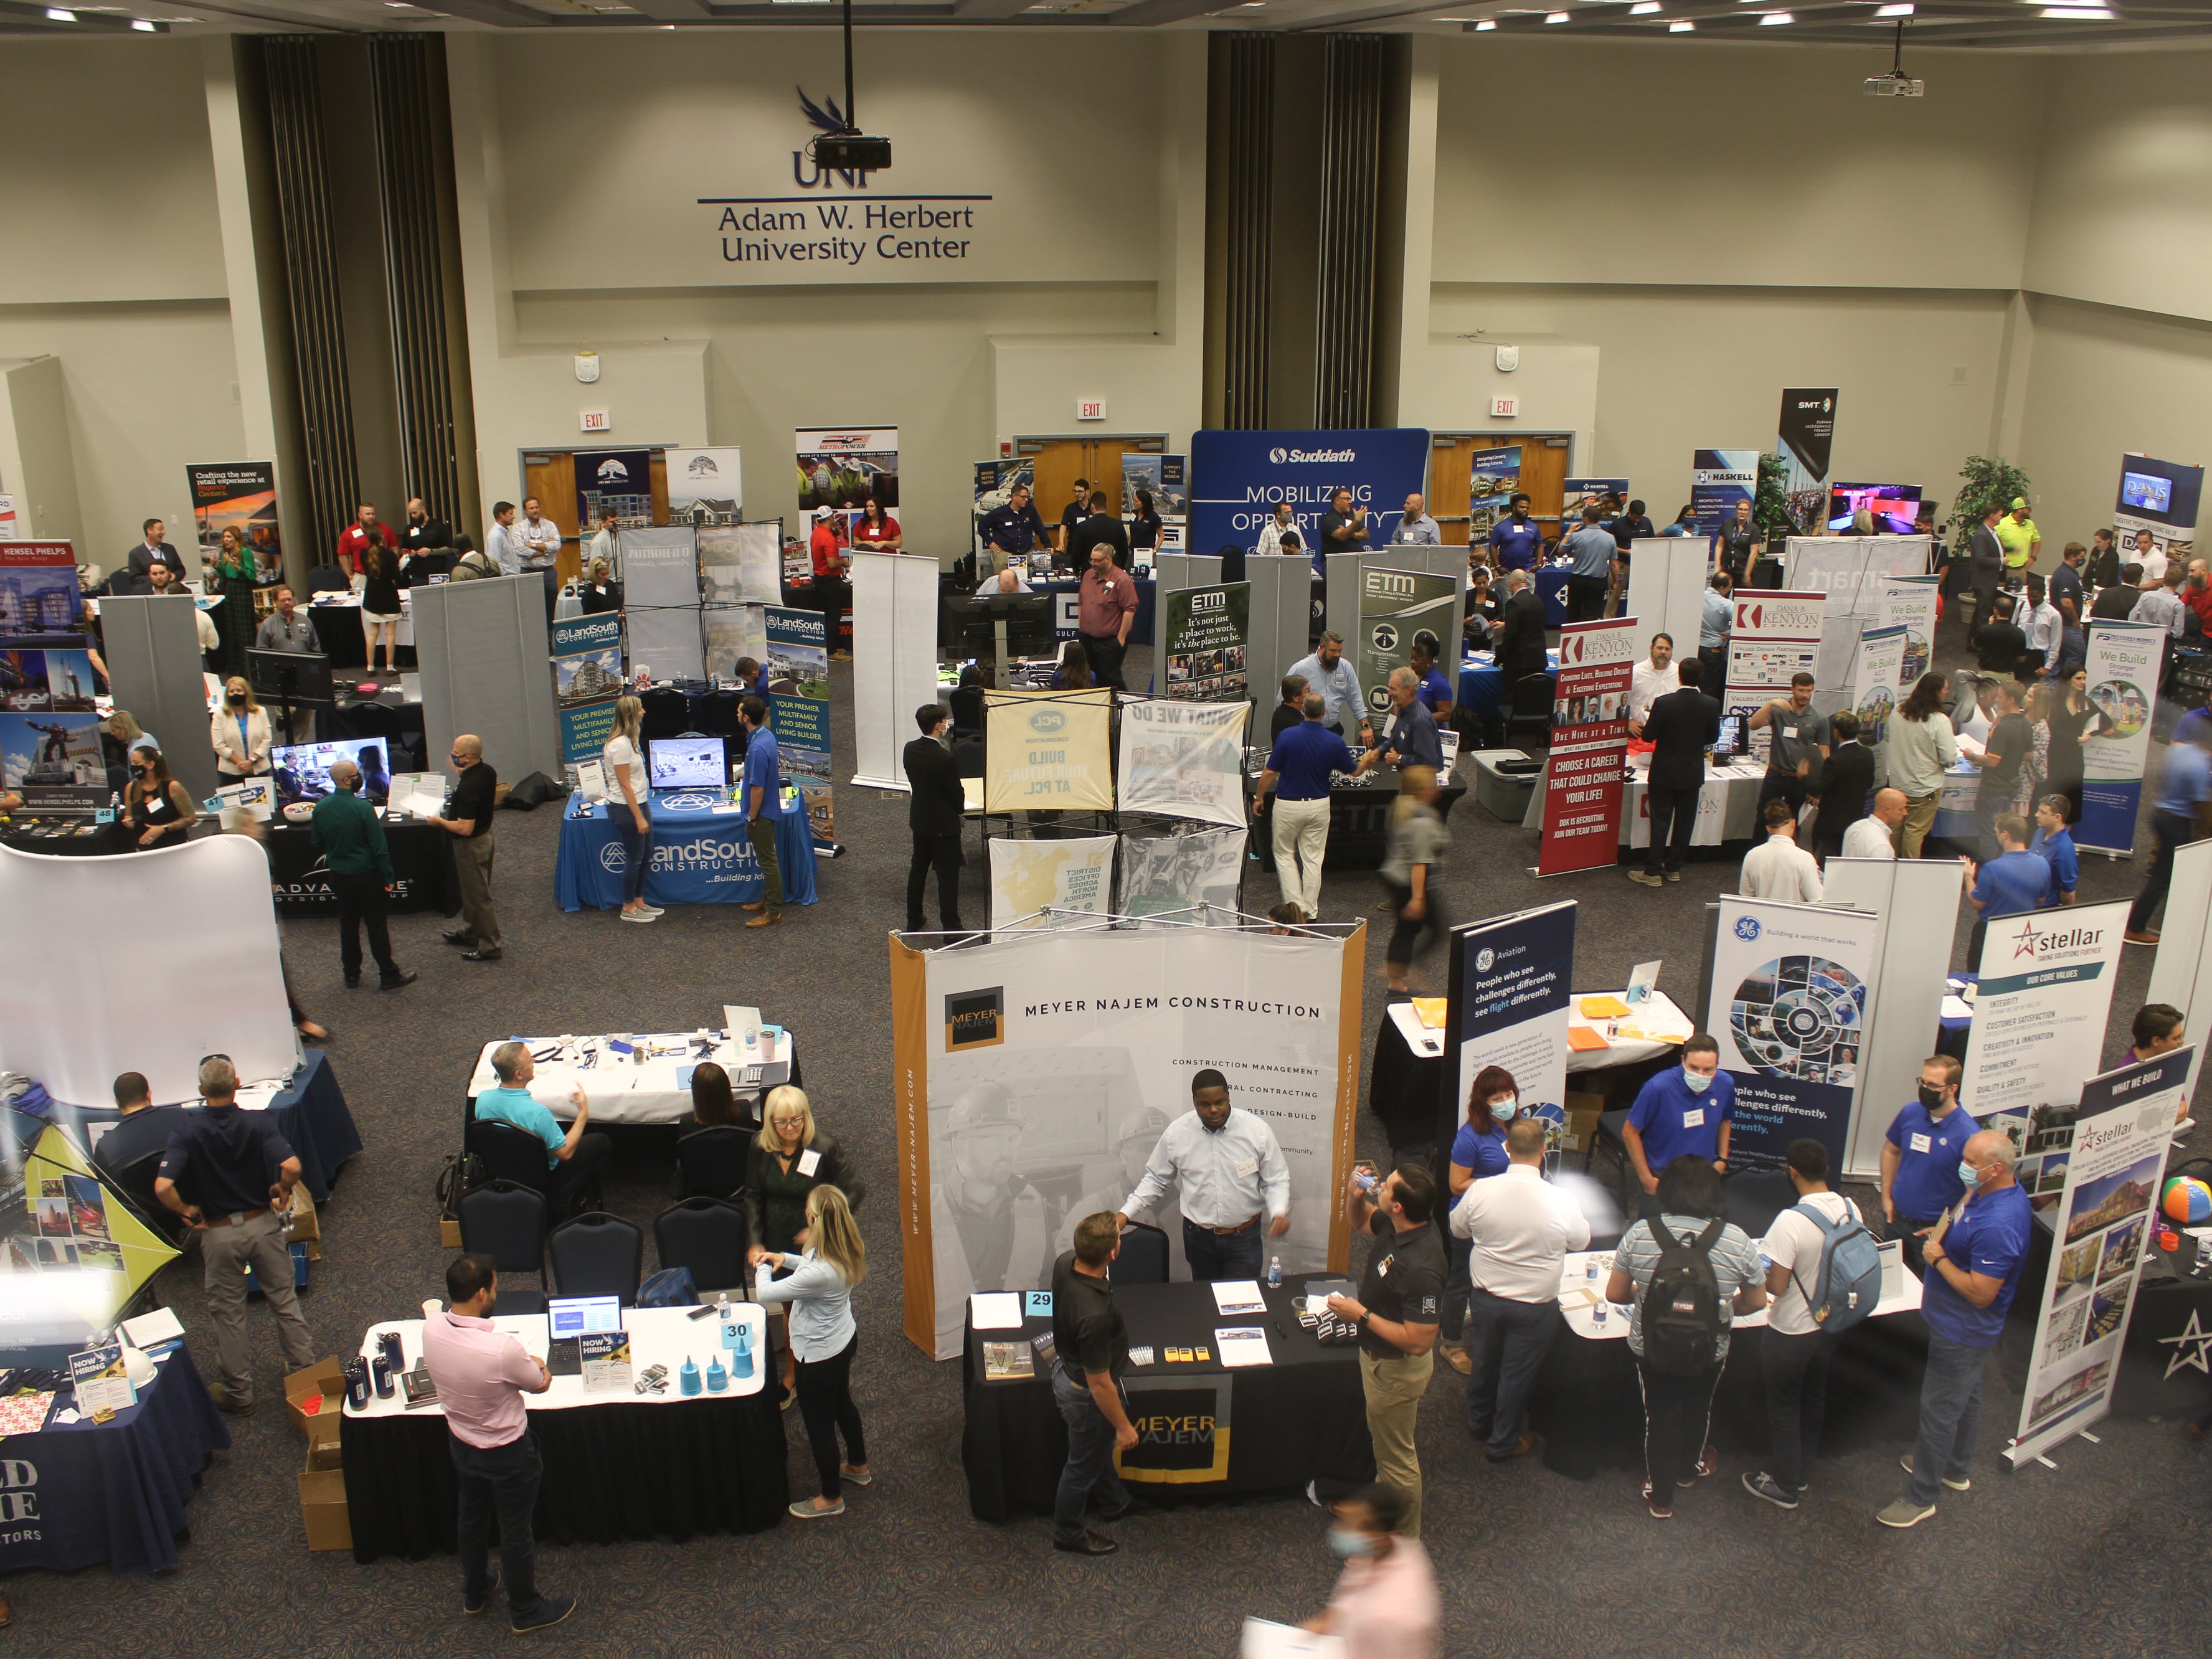 Overview of career fair